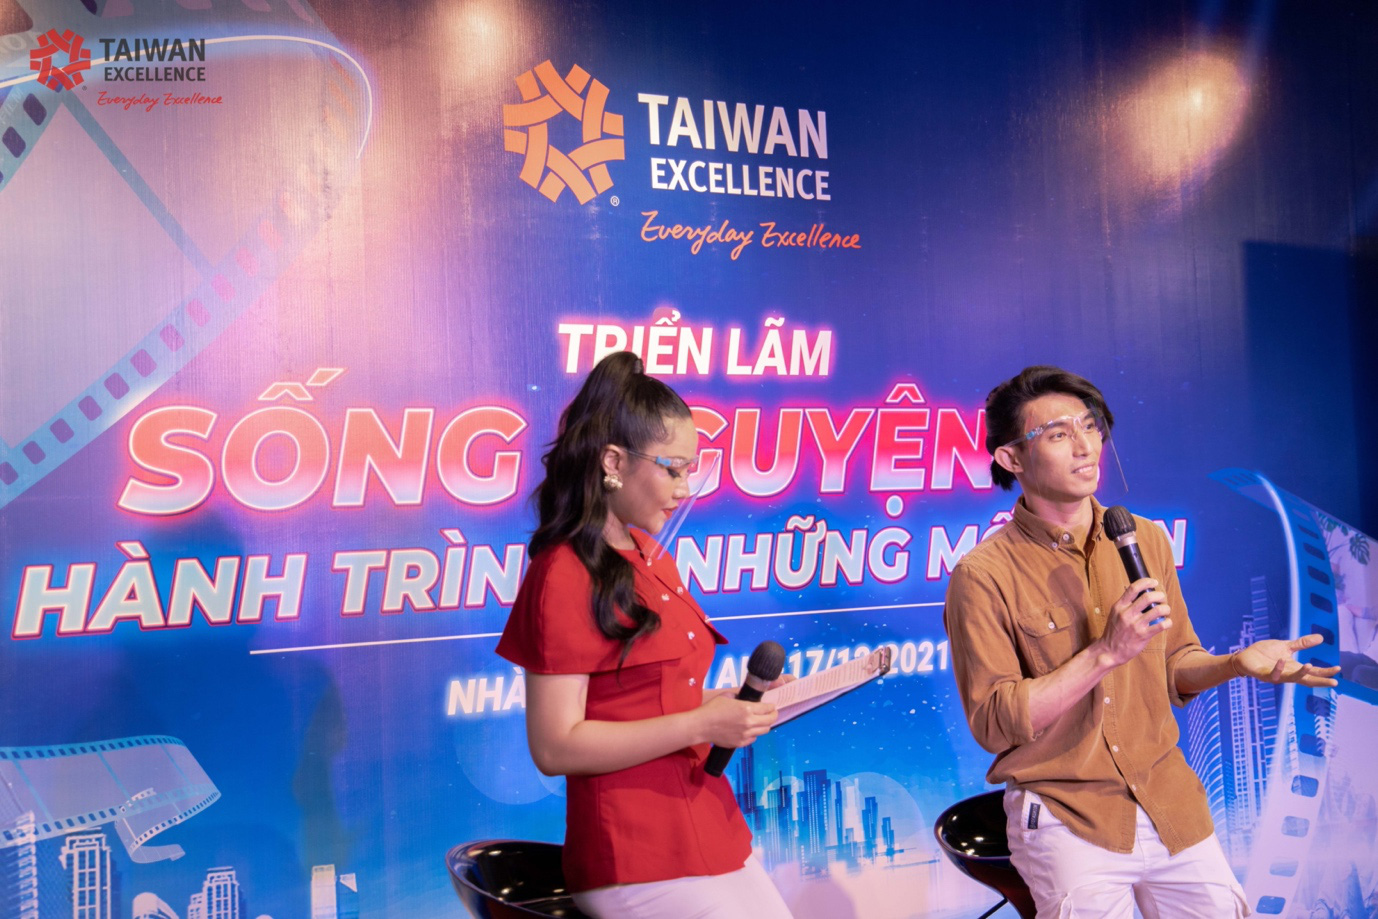 Taiwan Excellence organizes the exhibition 